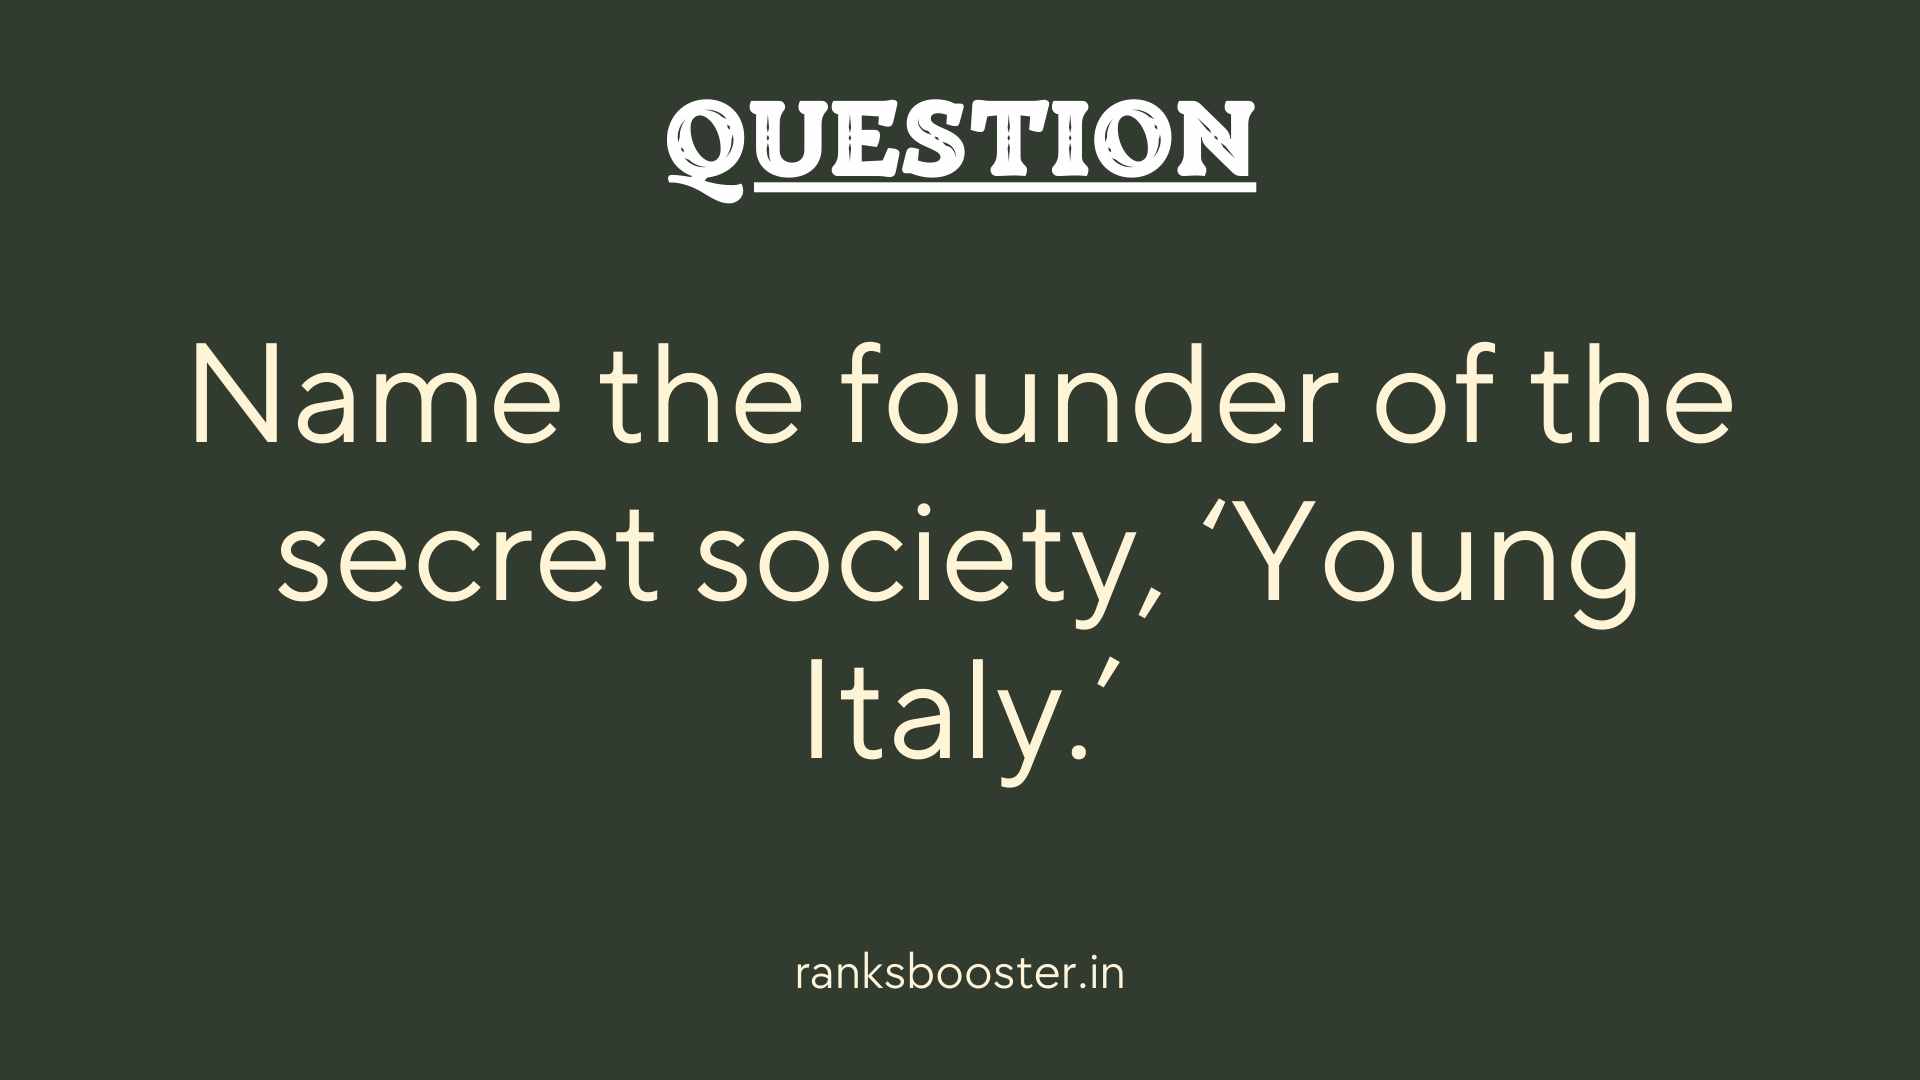 Question: Name the founder of the secret society, ‘Young Italy.’